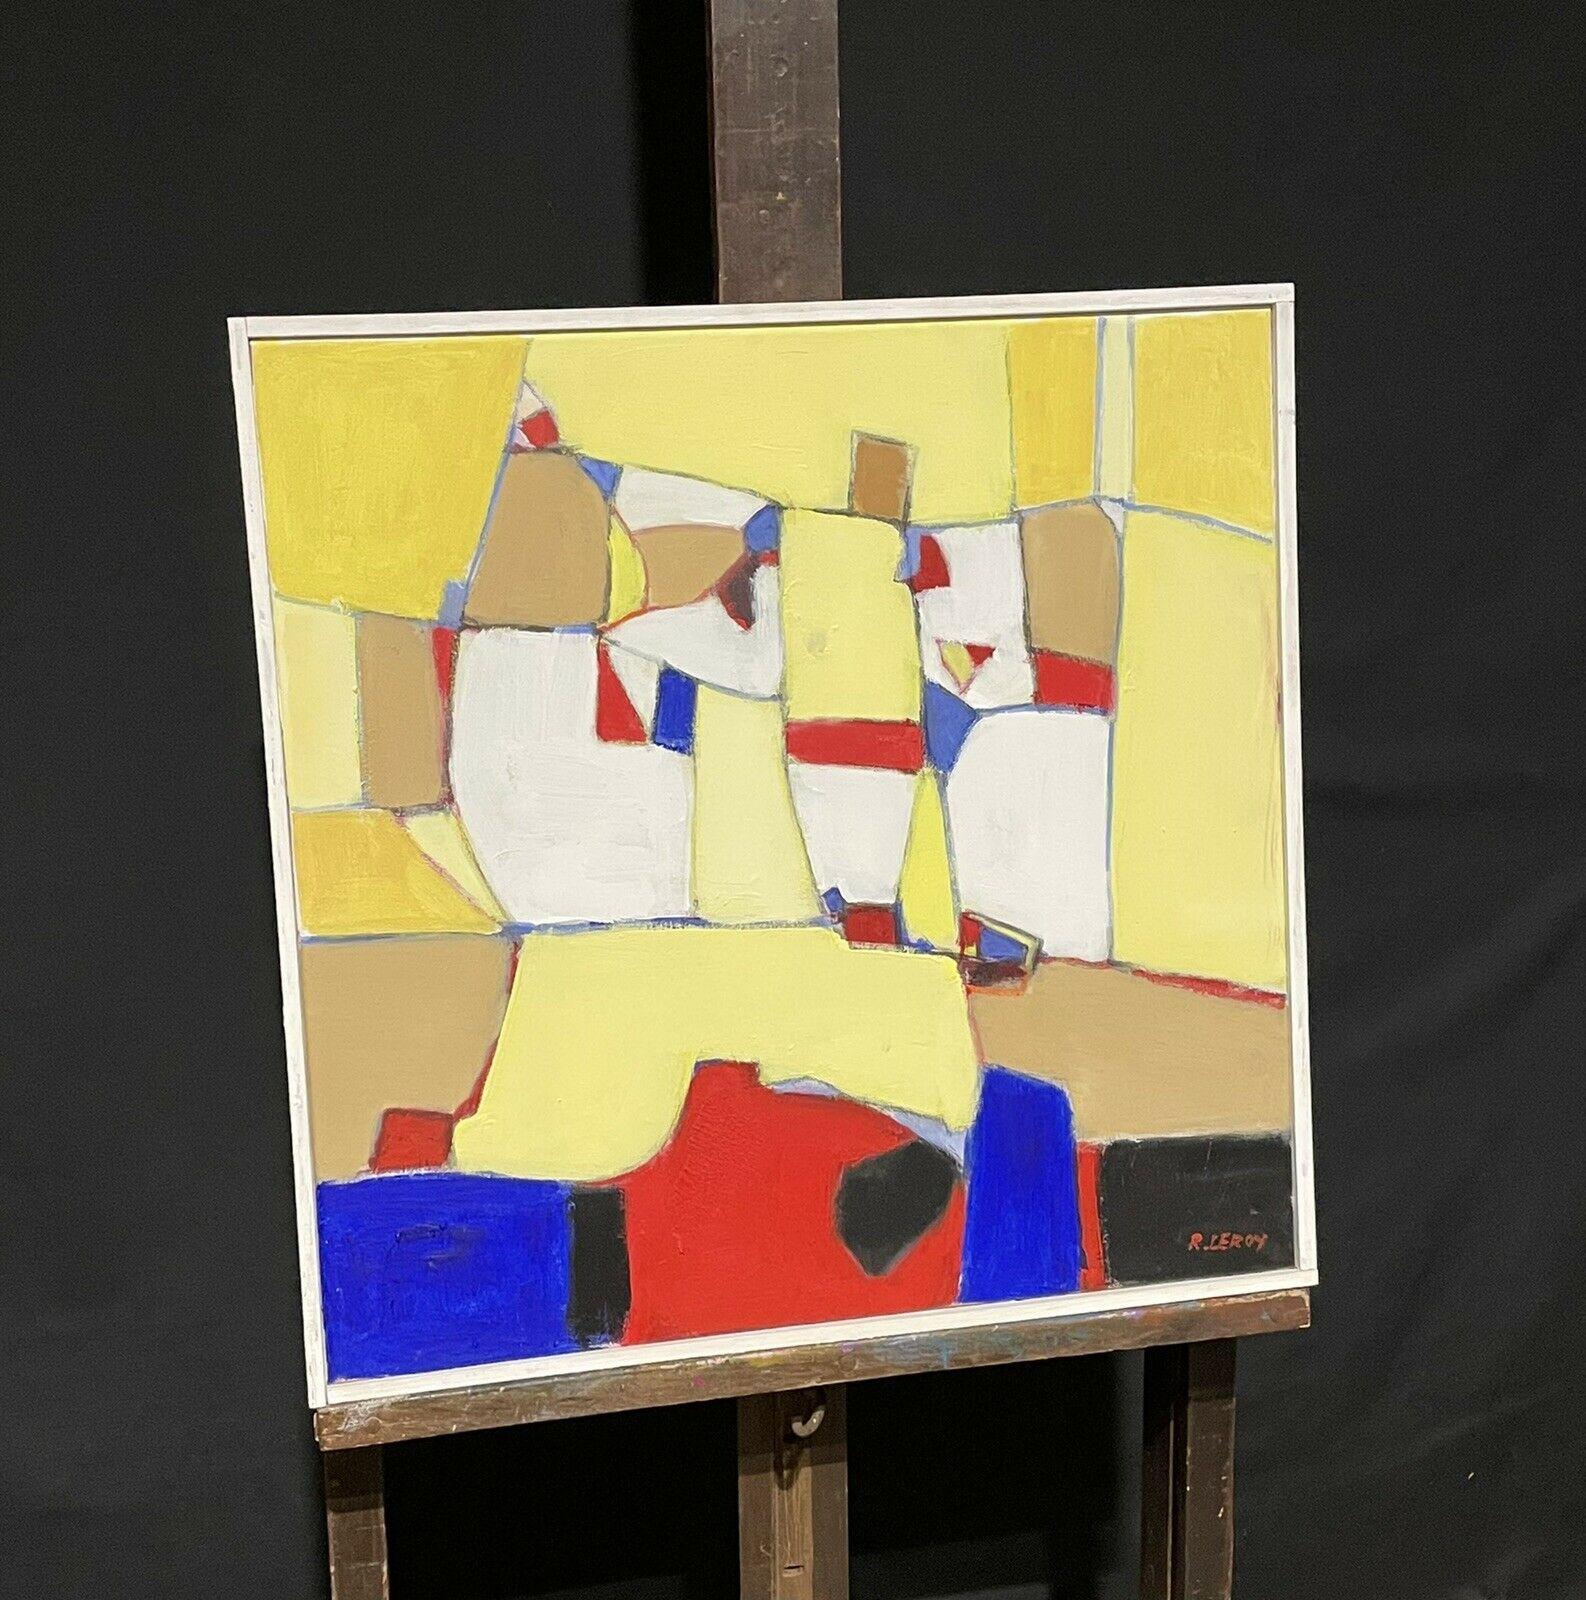 LARGE FRENCH CONTEMPORARY ABSTRACT CUBIST PAINTING - BEAUTIFUL COLORS - Painting by R.Leroy